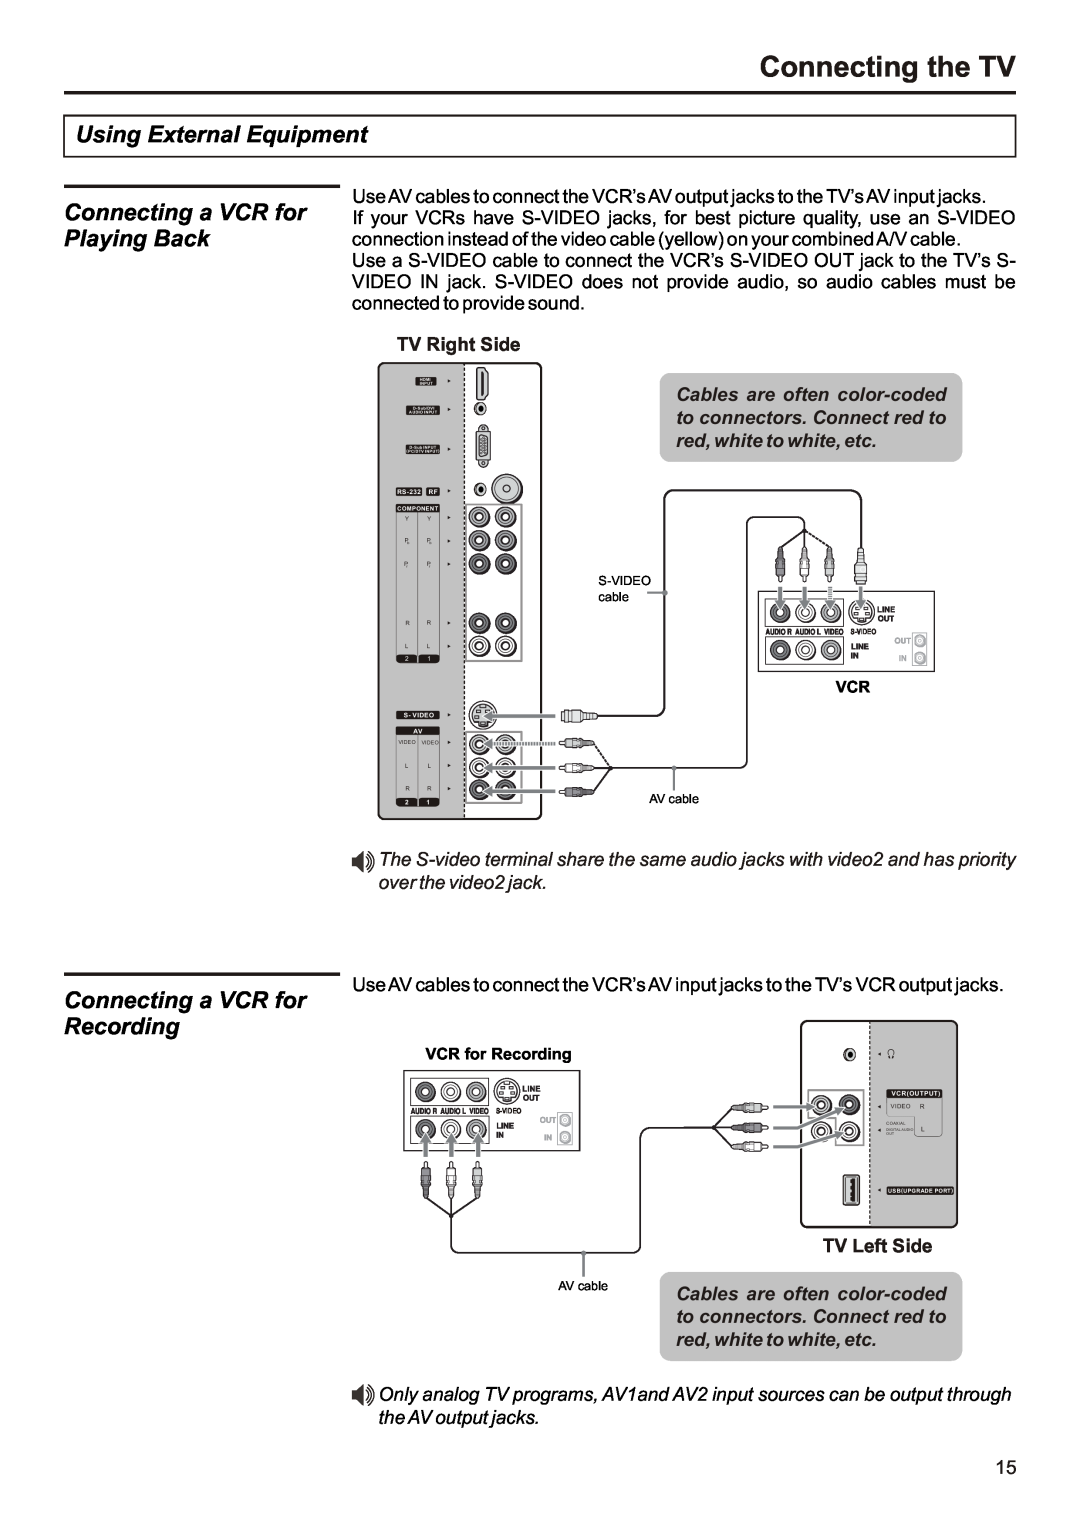 Audiovox FPE3207 operation manual Connecting a VCR for Playing Back, Connecting a VCR for Recording, Connecting the TV 